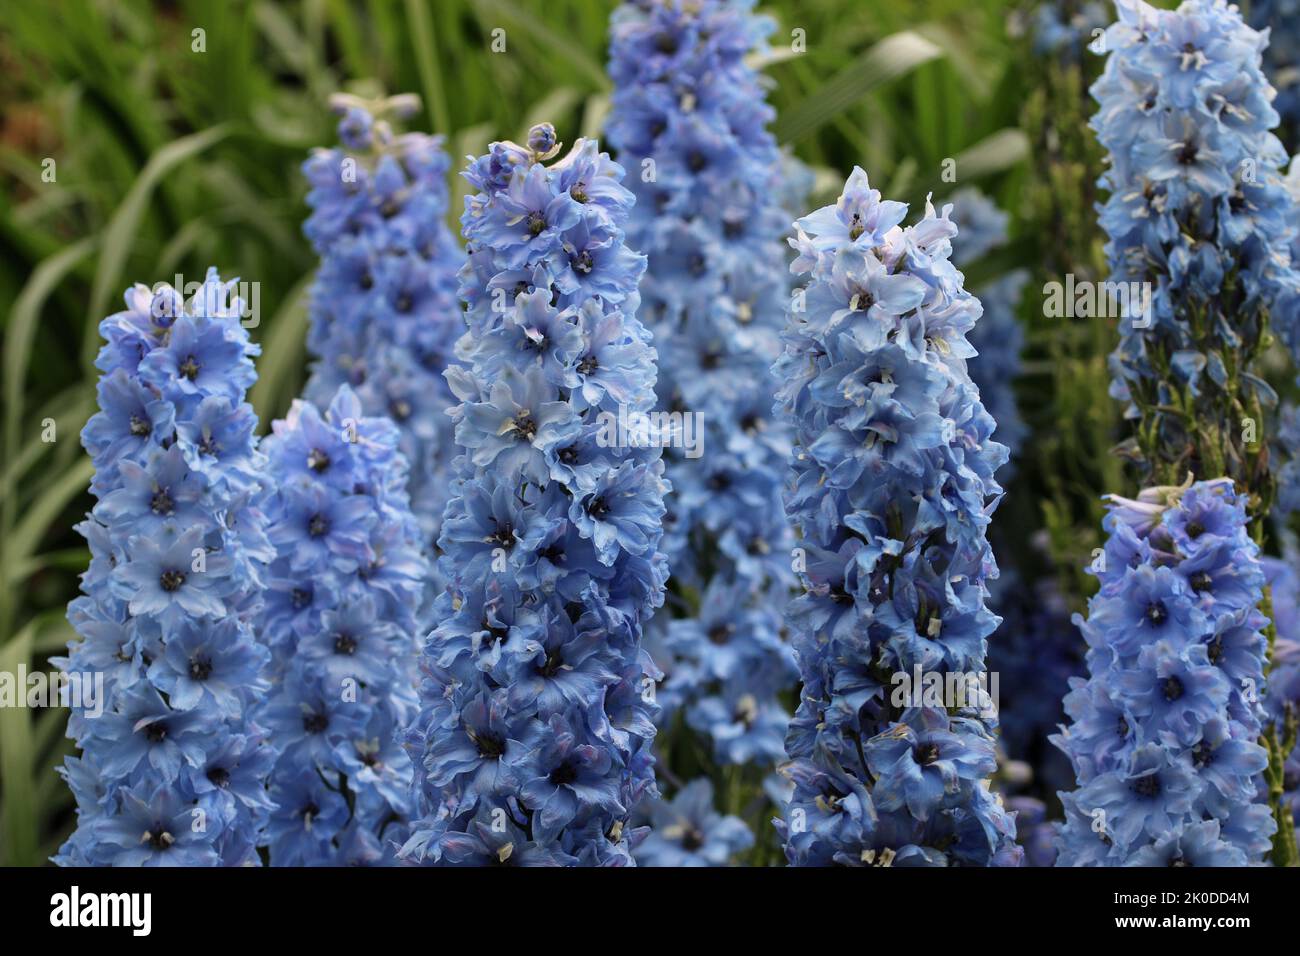 Flowering spikes of blue delphinium flowers with white centres and a blurred background of leaves. Stock Photo